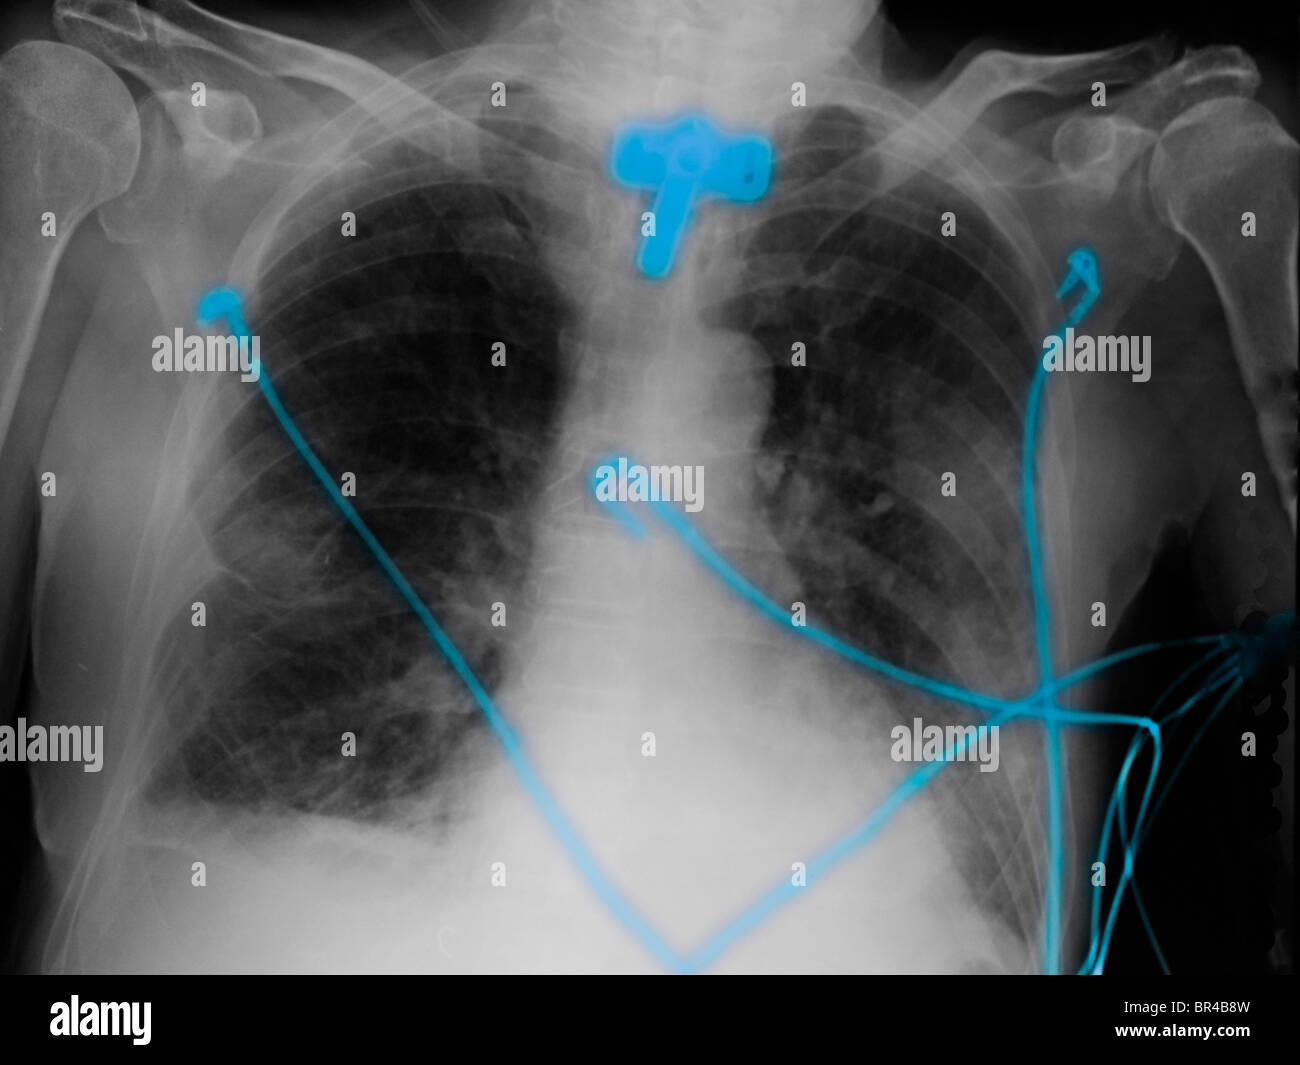 chest x-ray showing a tracheostomy in a 69 year old man. Stock Photo